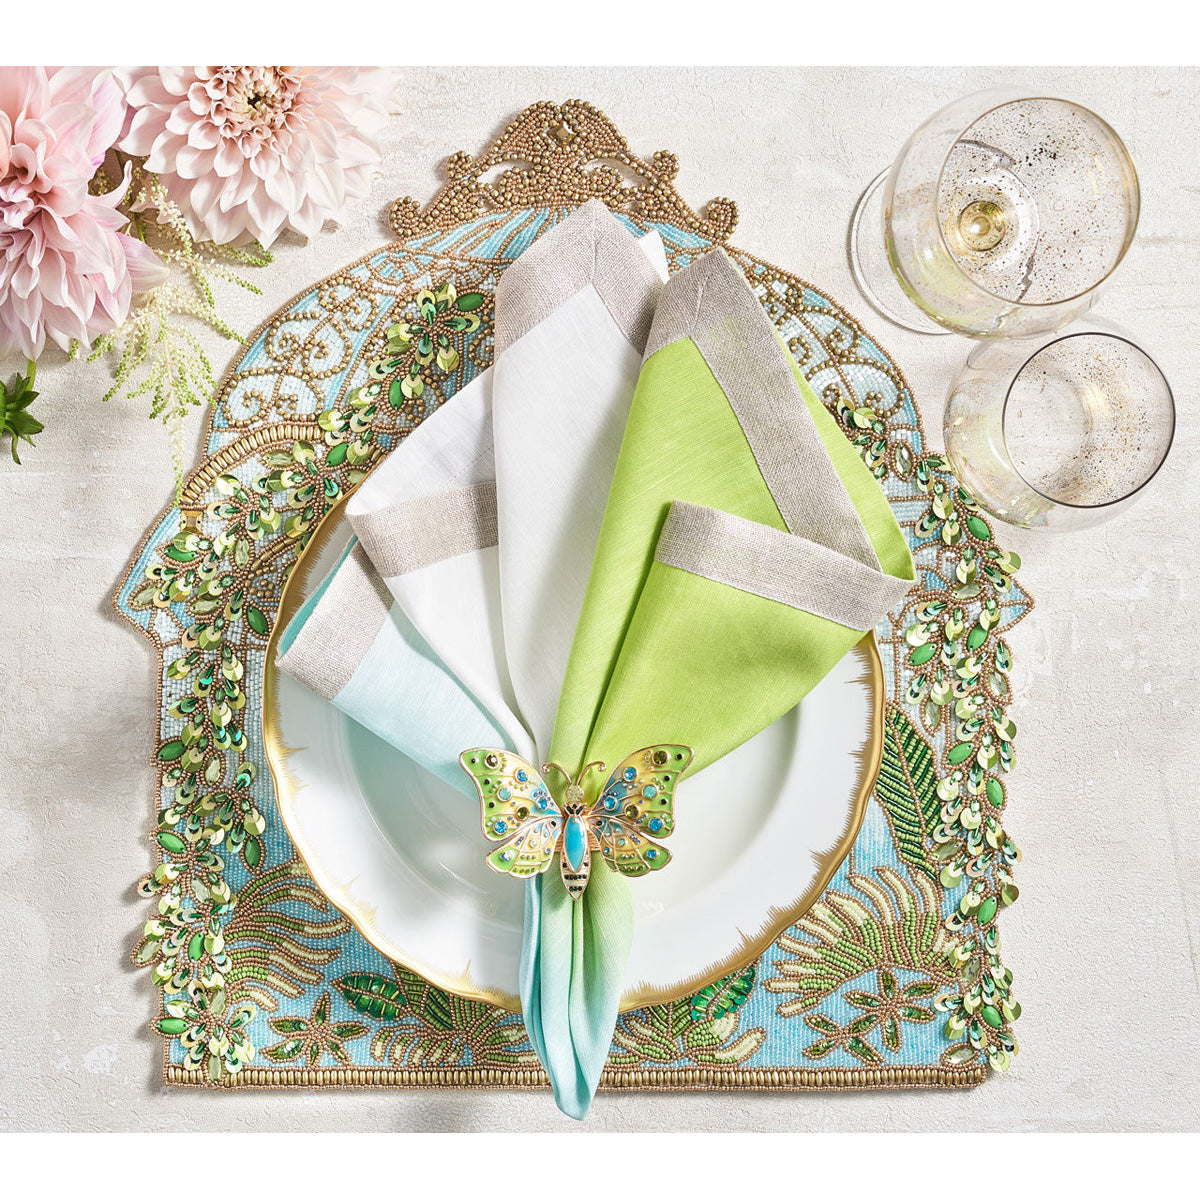 Arbor Napkin Ring in Blue & Green - Set of 4 in a Gift Box by Kim Seybert Additional Image-1